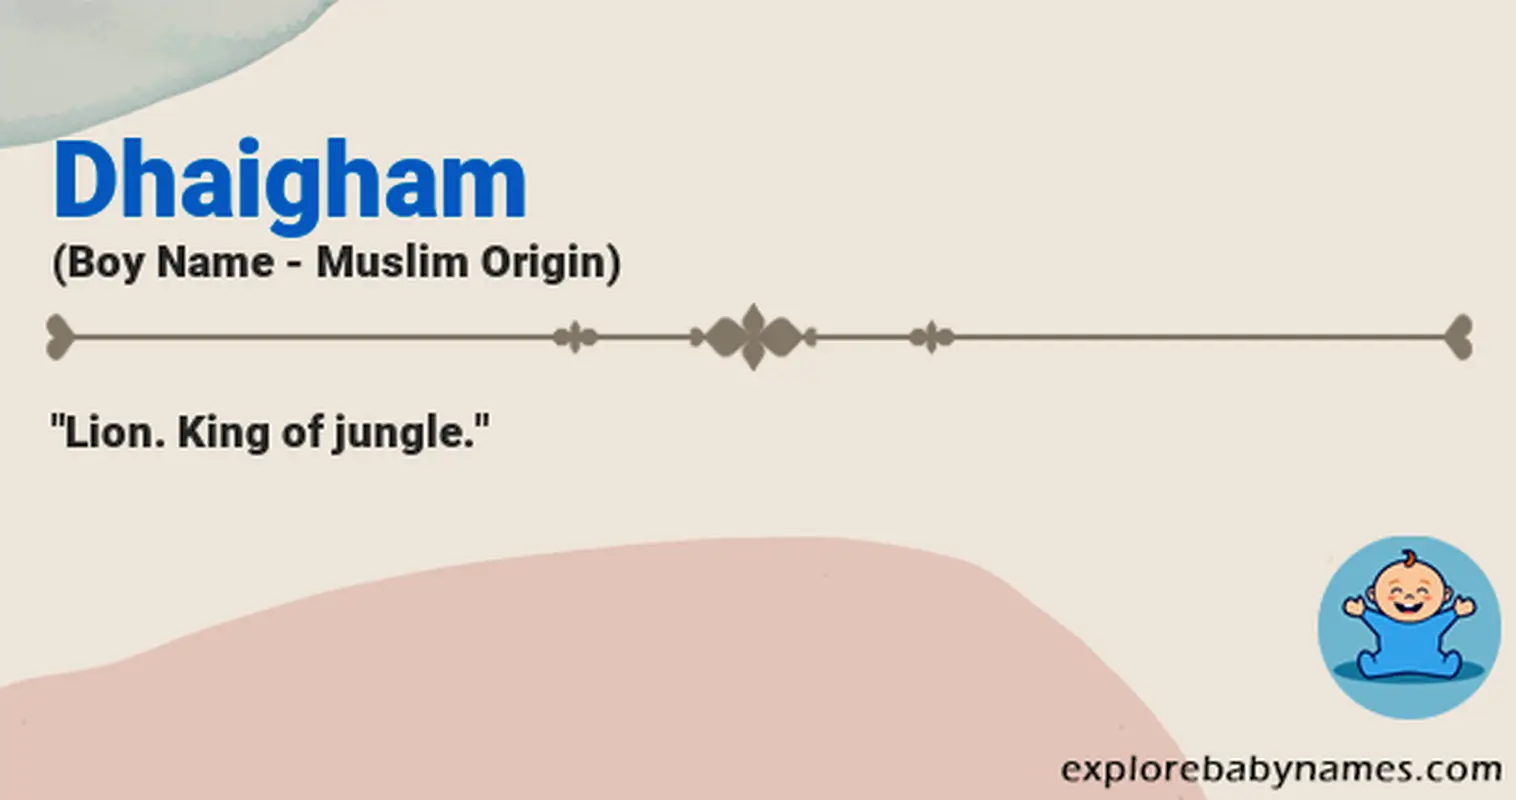 Meaning of Dhaigham